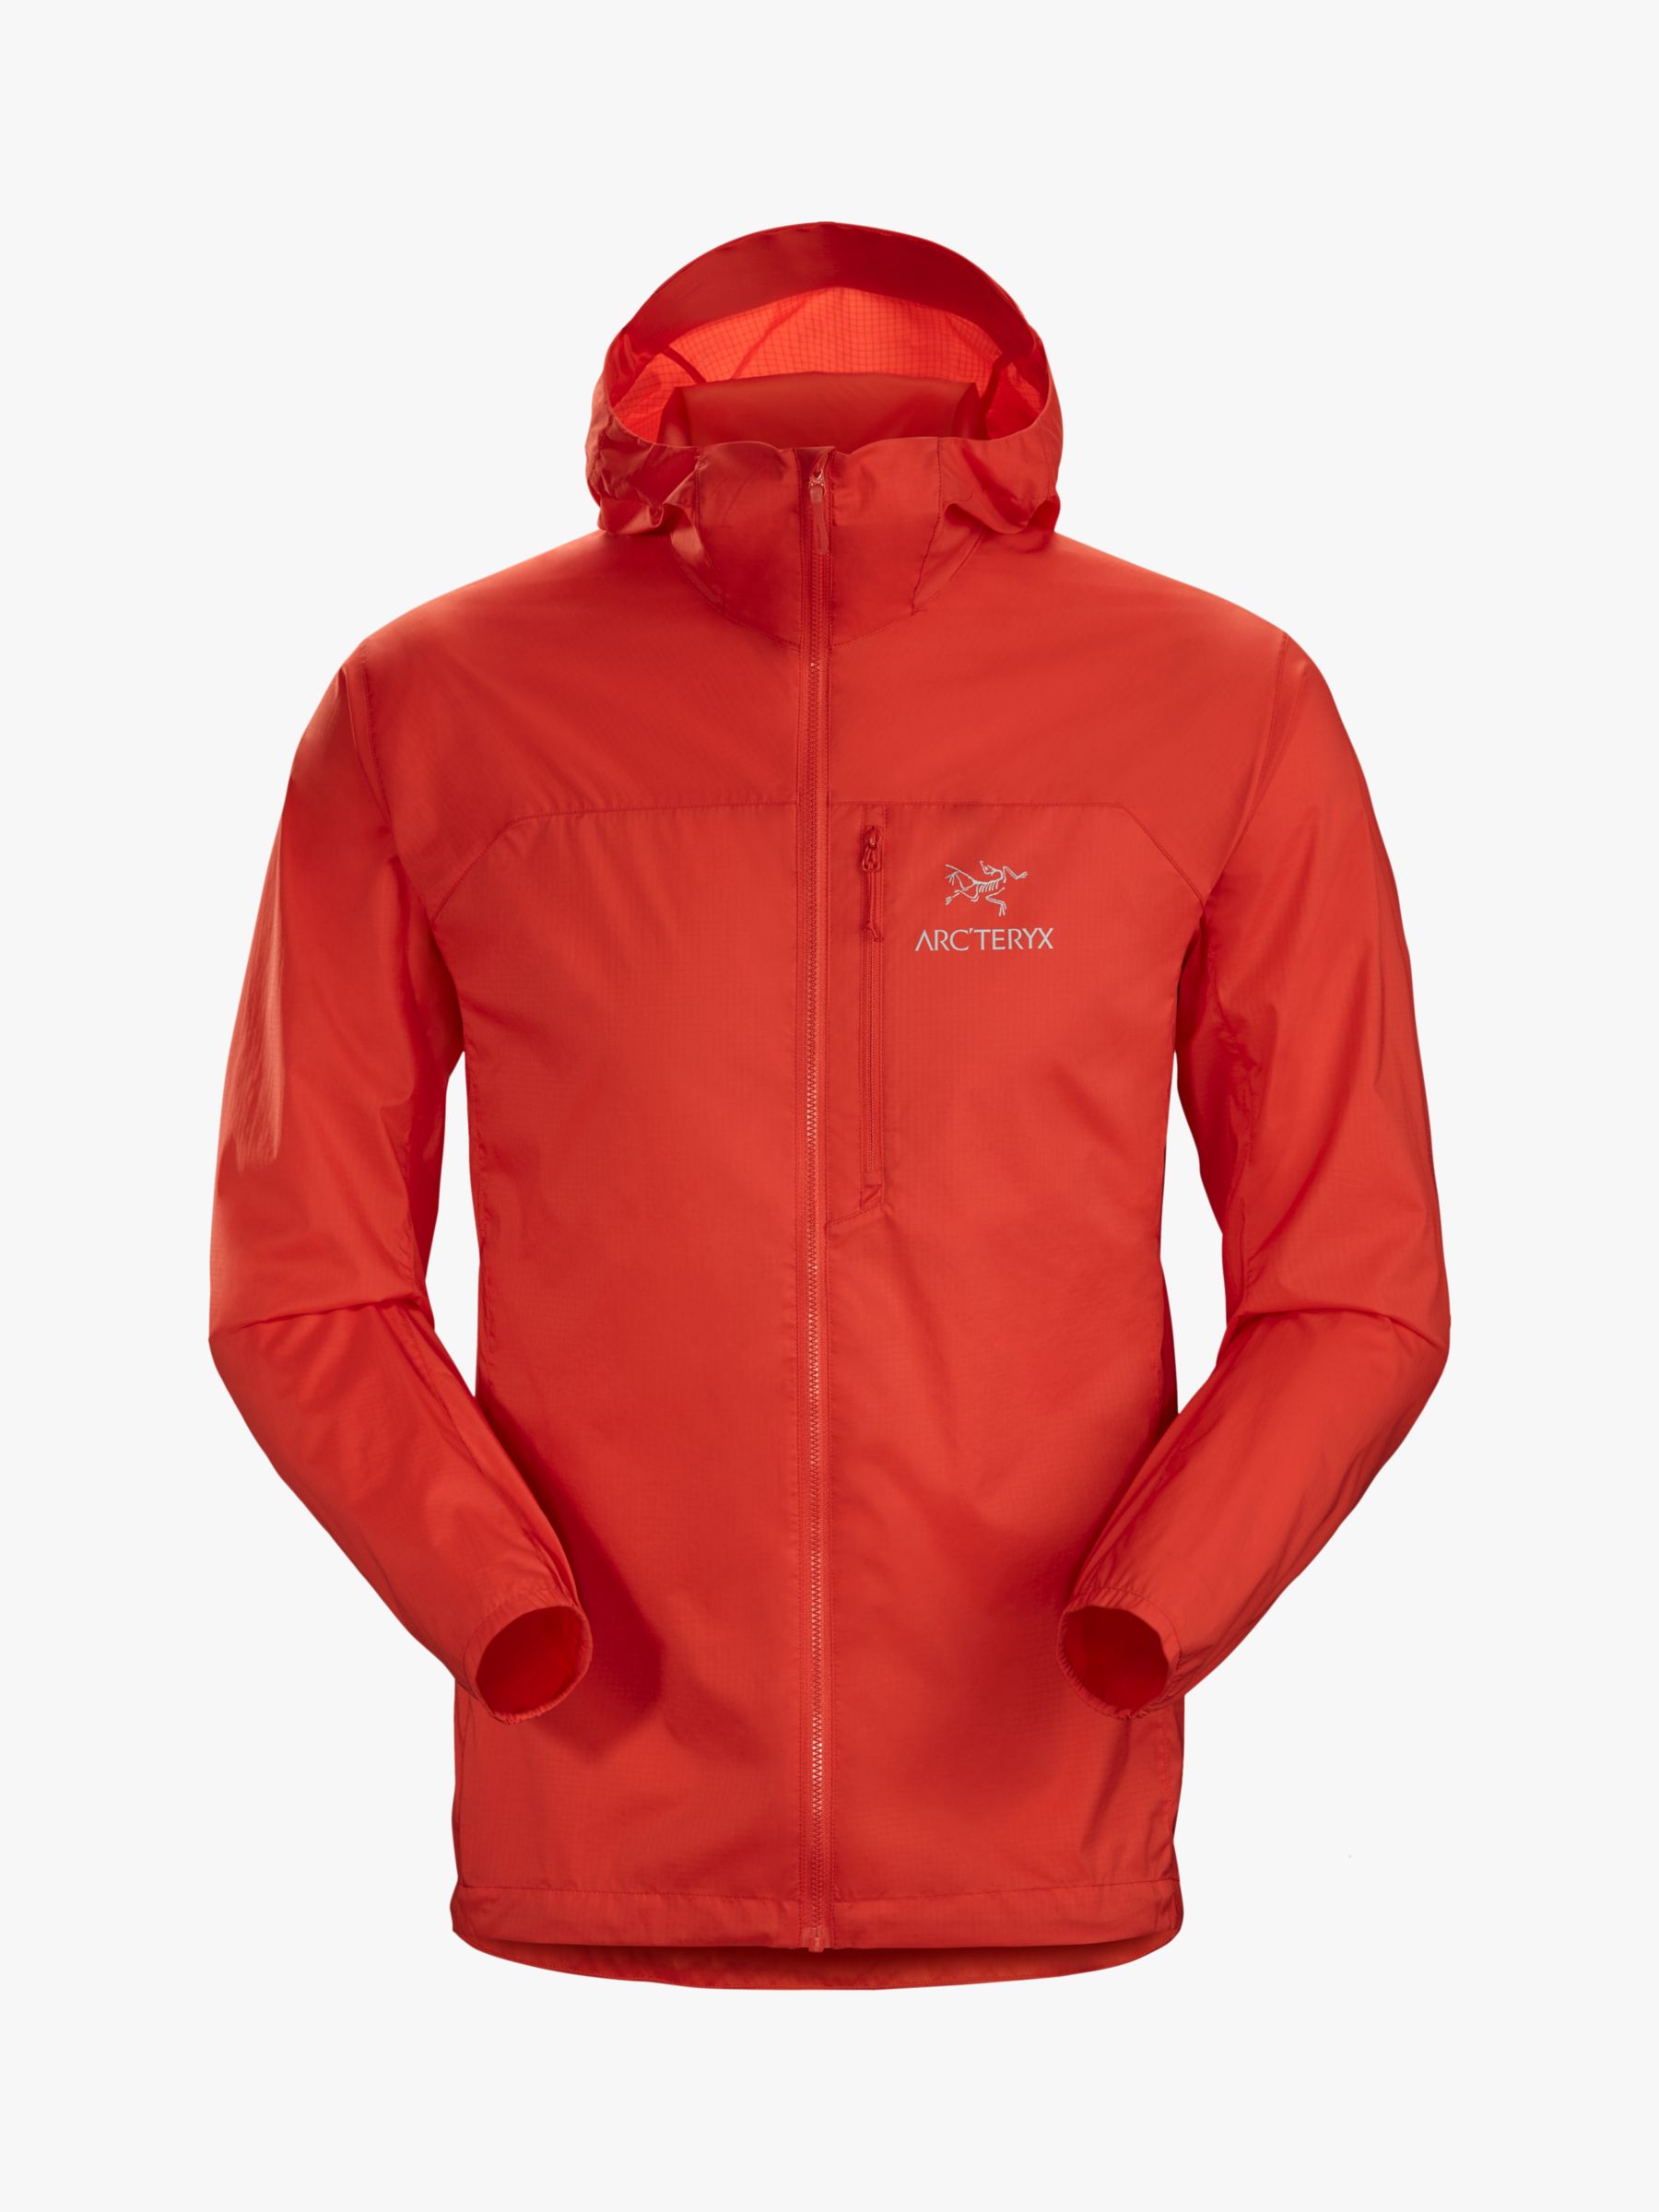 Arc'teryx Squamish Men's Hooded Jacket, Hyperspace at John Lewis & Partners